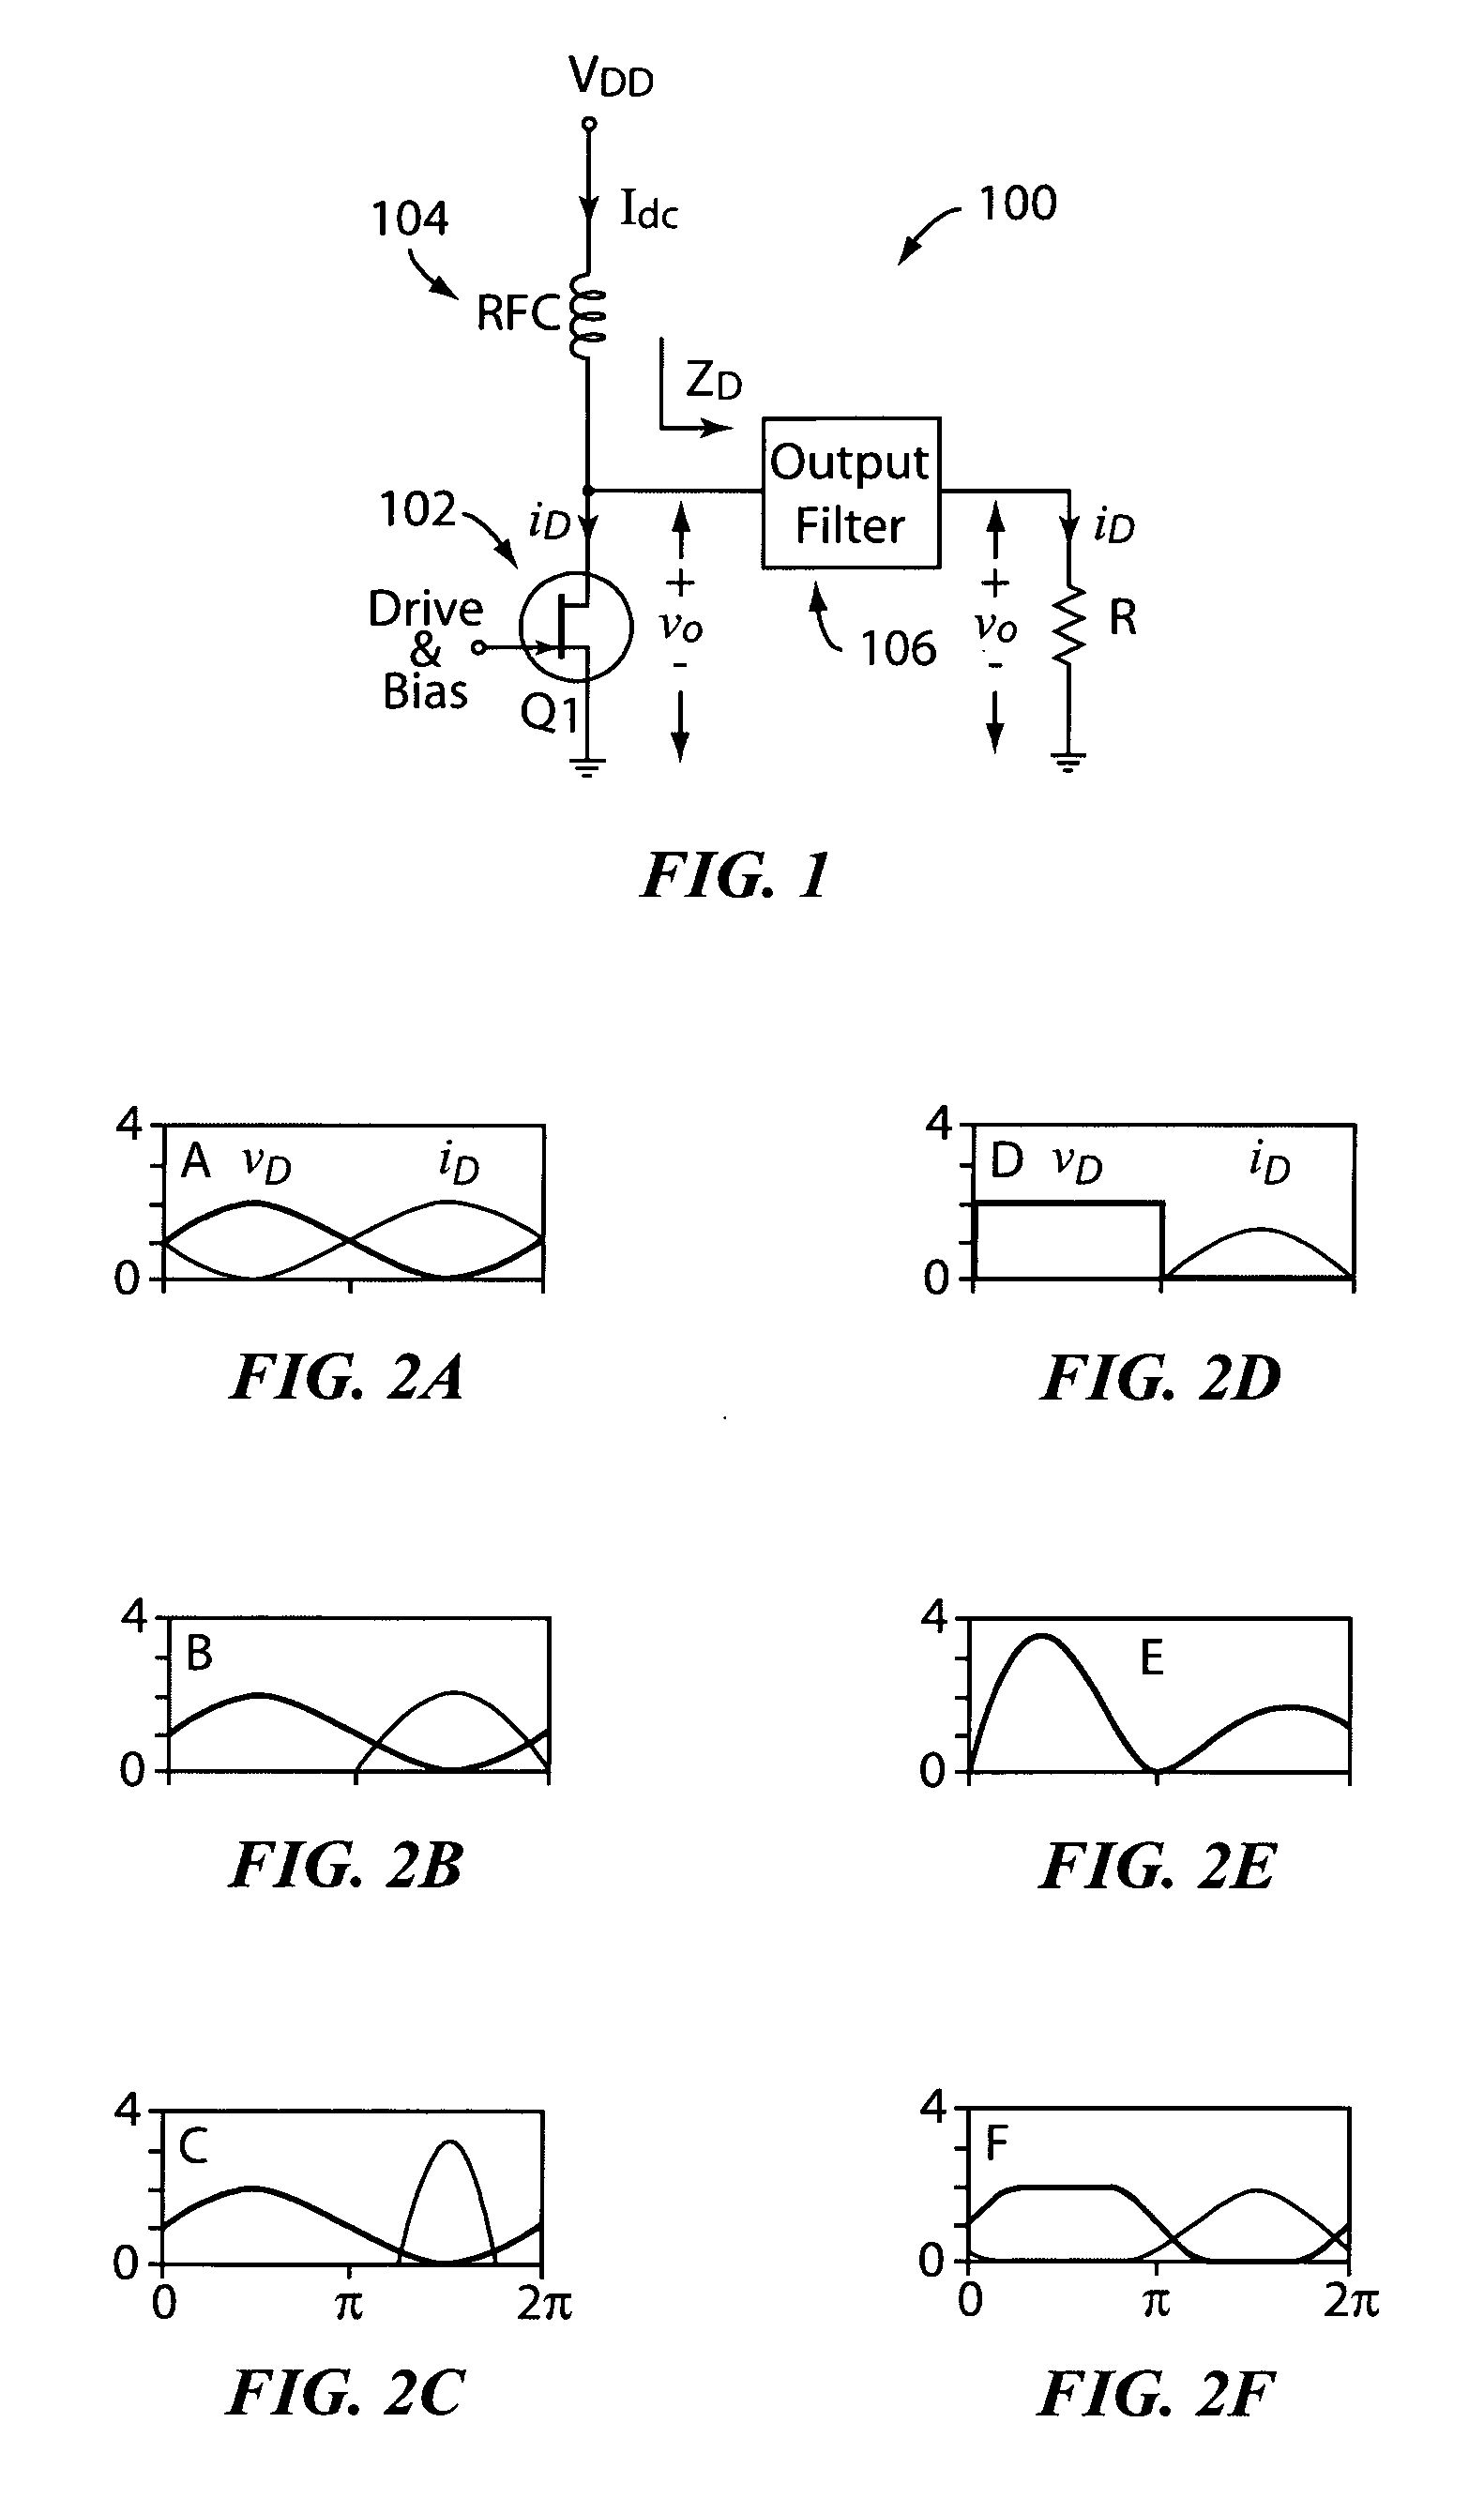 RF generator with phase controlled mosfets